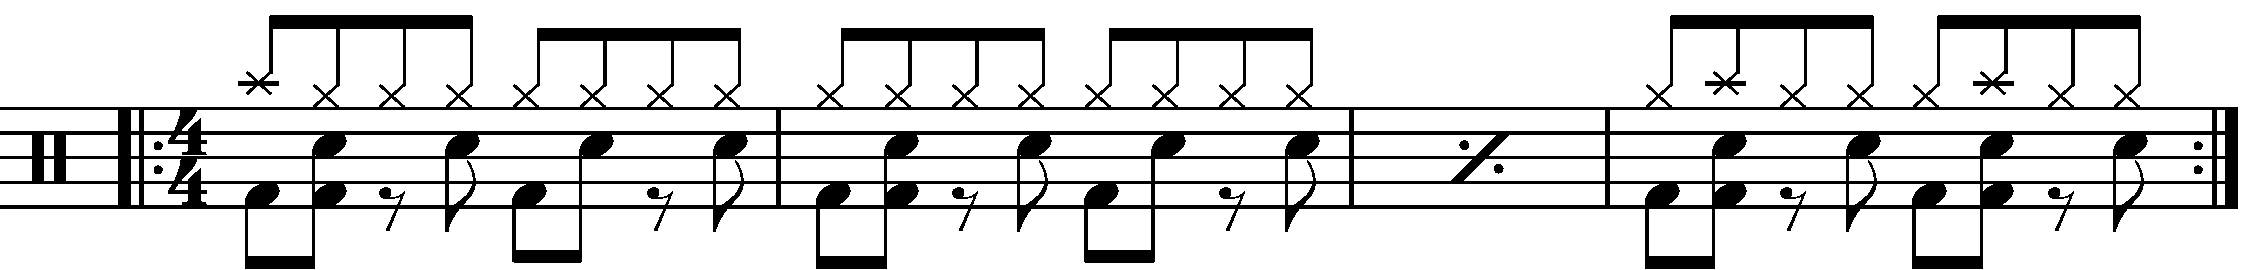 A four bar phrase using a double time groove.